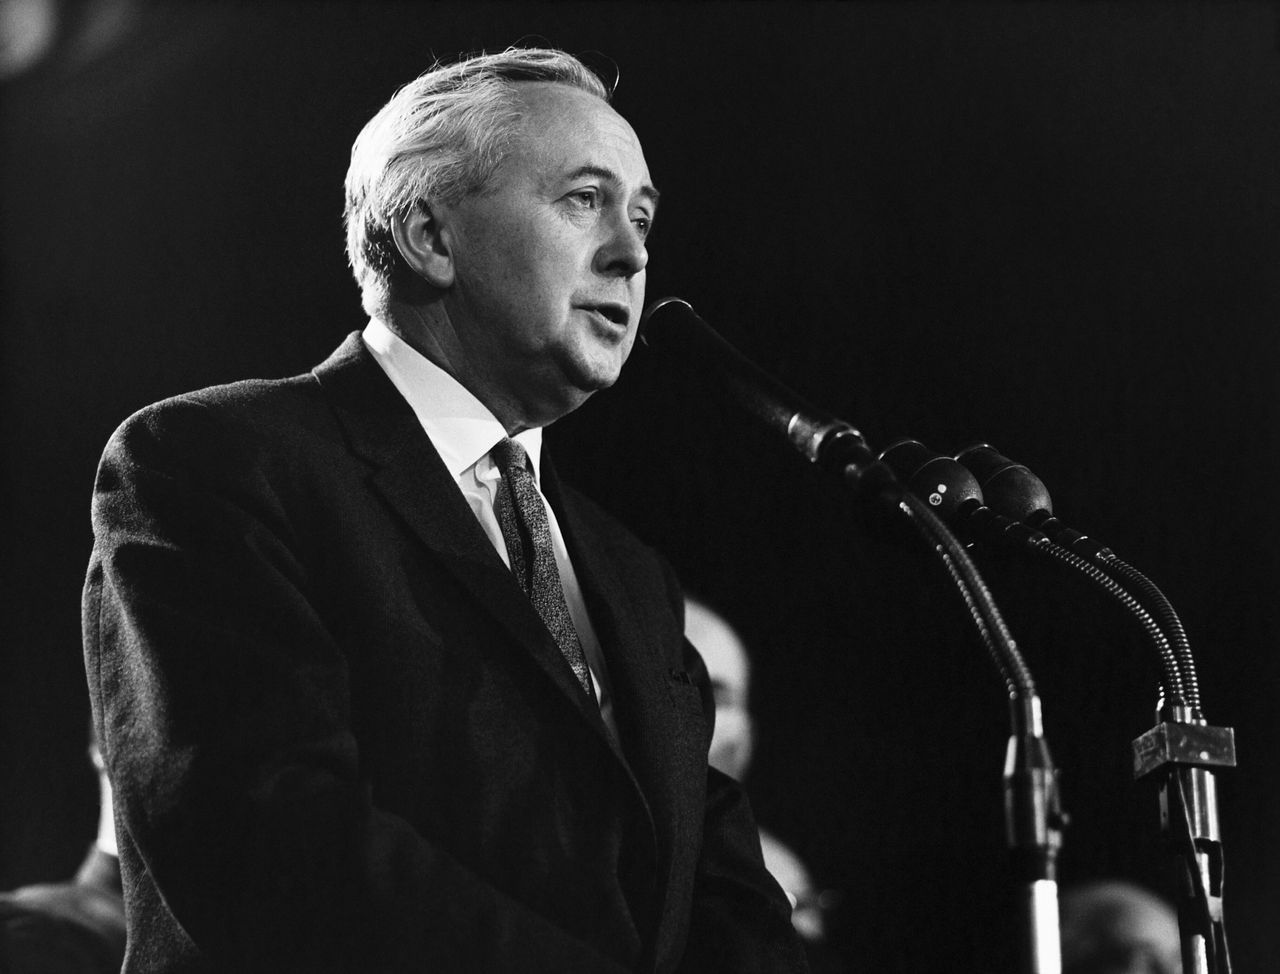 Harold Wilson, Labour PM 1964-1970 and 1974-1976